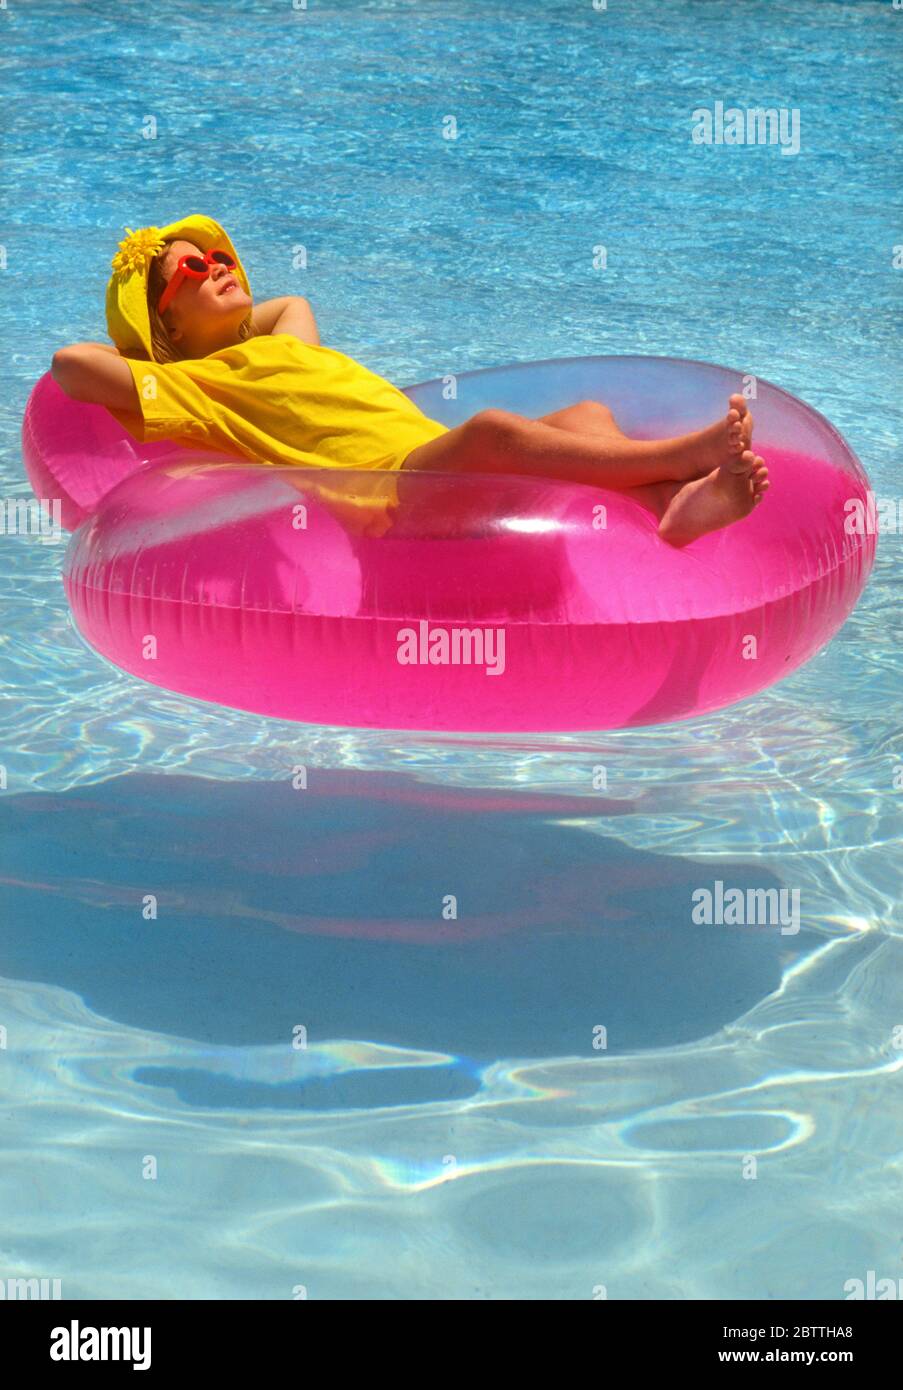 girl 5-6 years pool on pink lilo floater on holiday wearing sun safe t shirt hat and sunglasses relaxing and chilling out in junior swimming pool Stock Photo